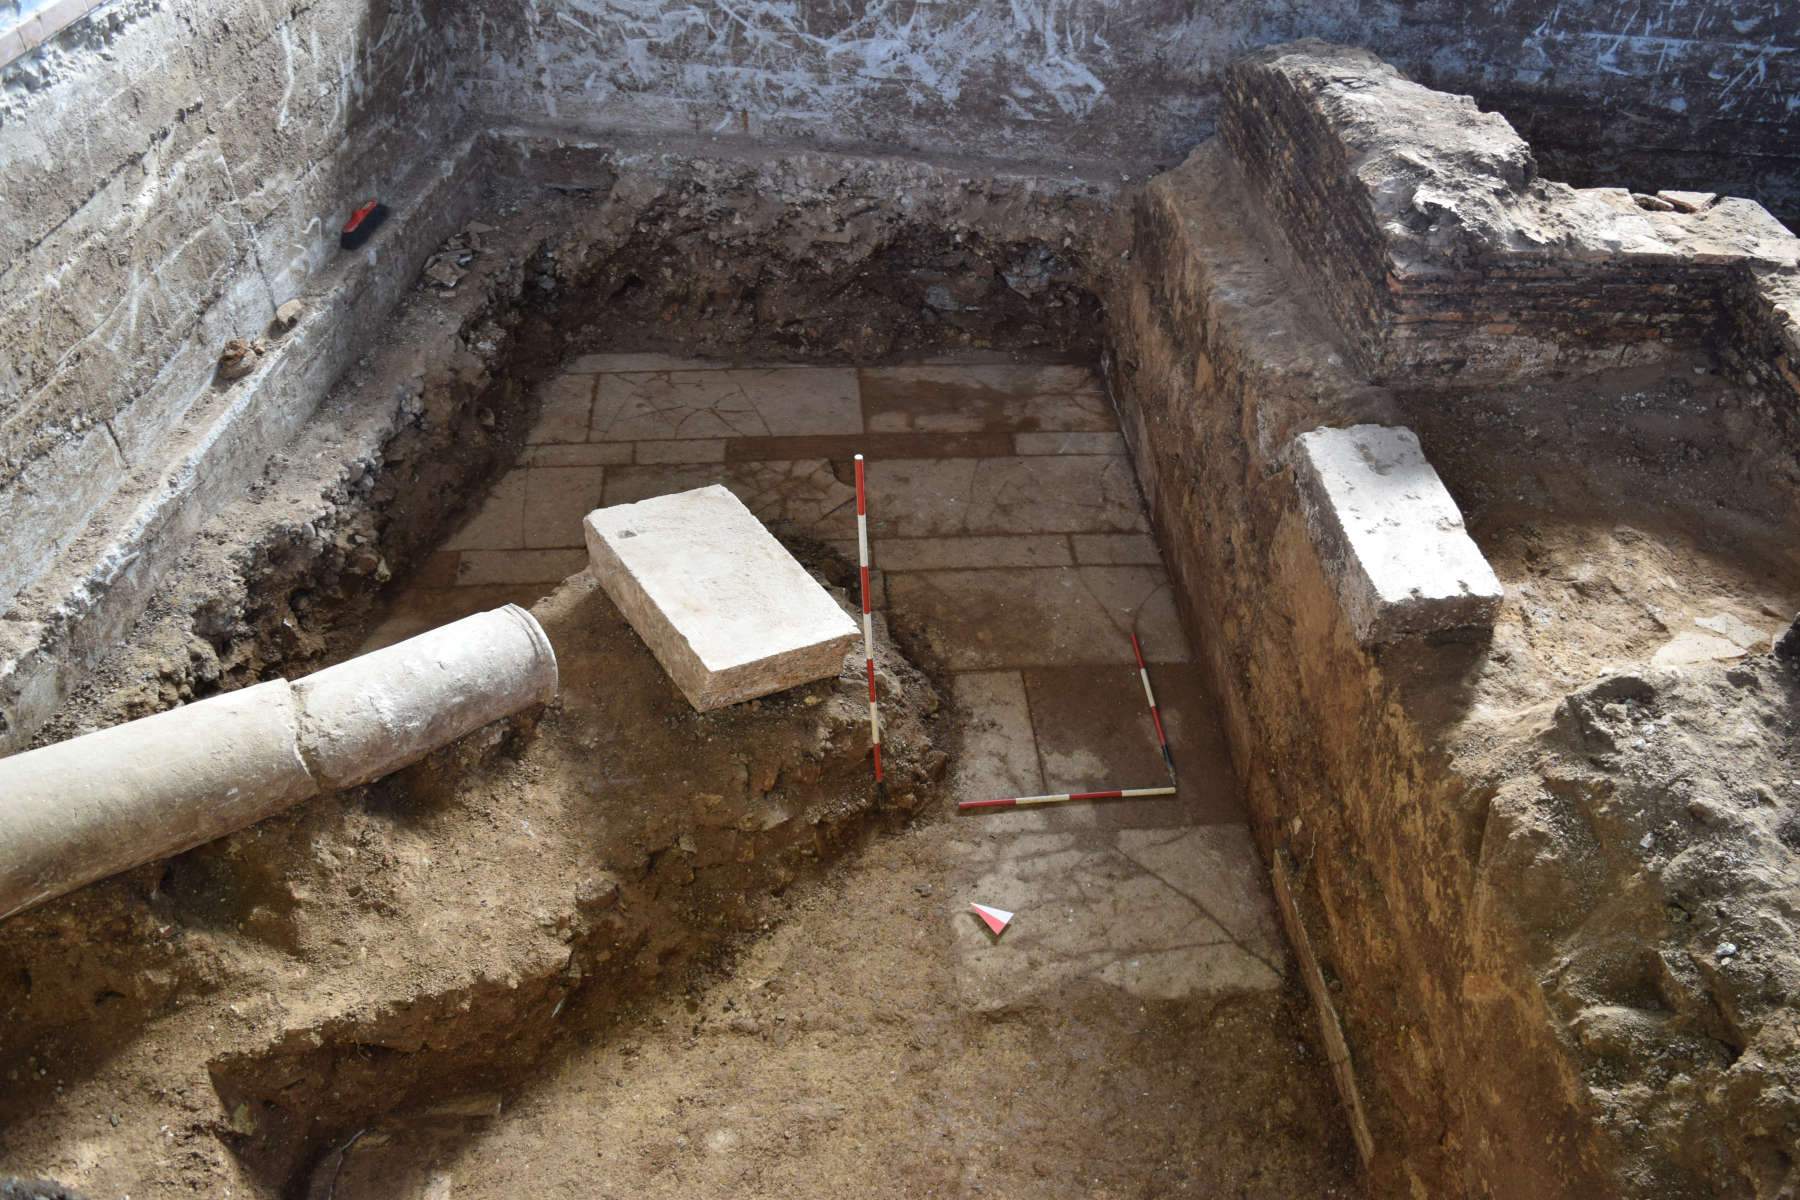 Vibo Valentia, Roman bath complex and other buildings discovered